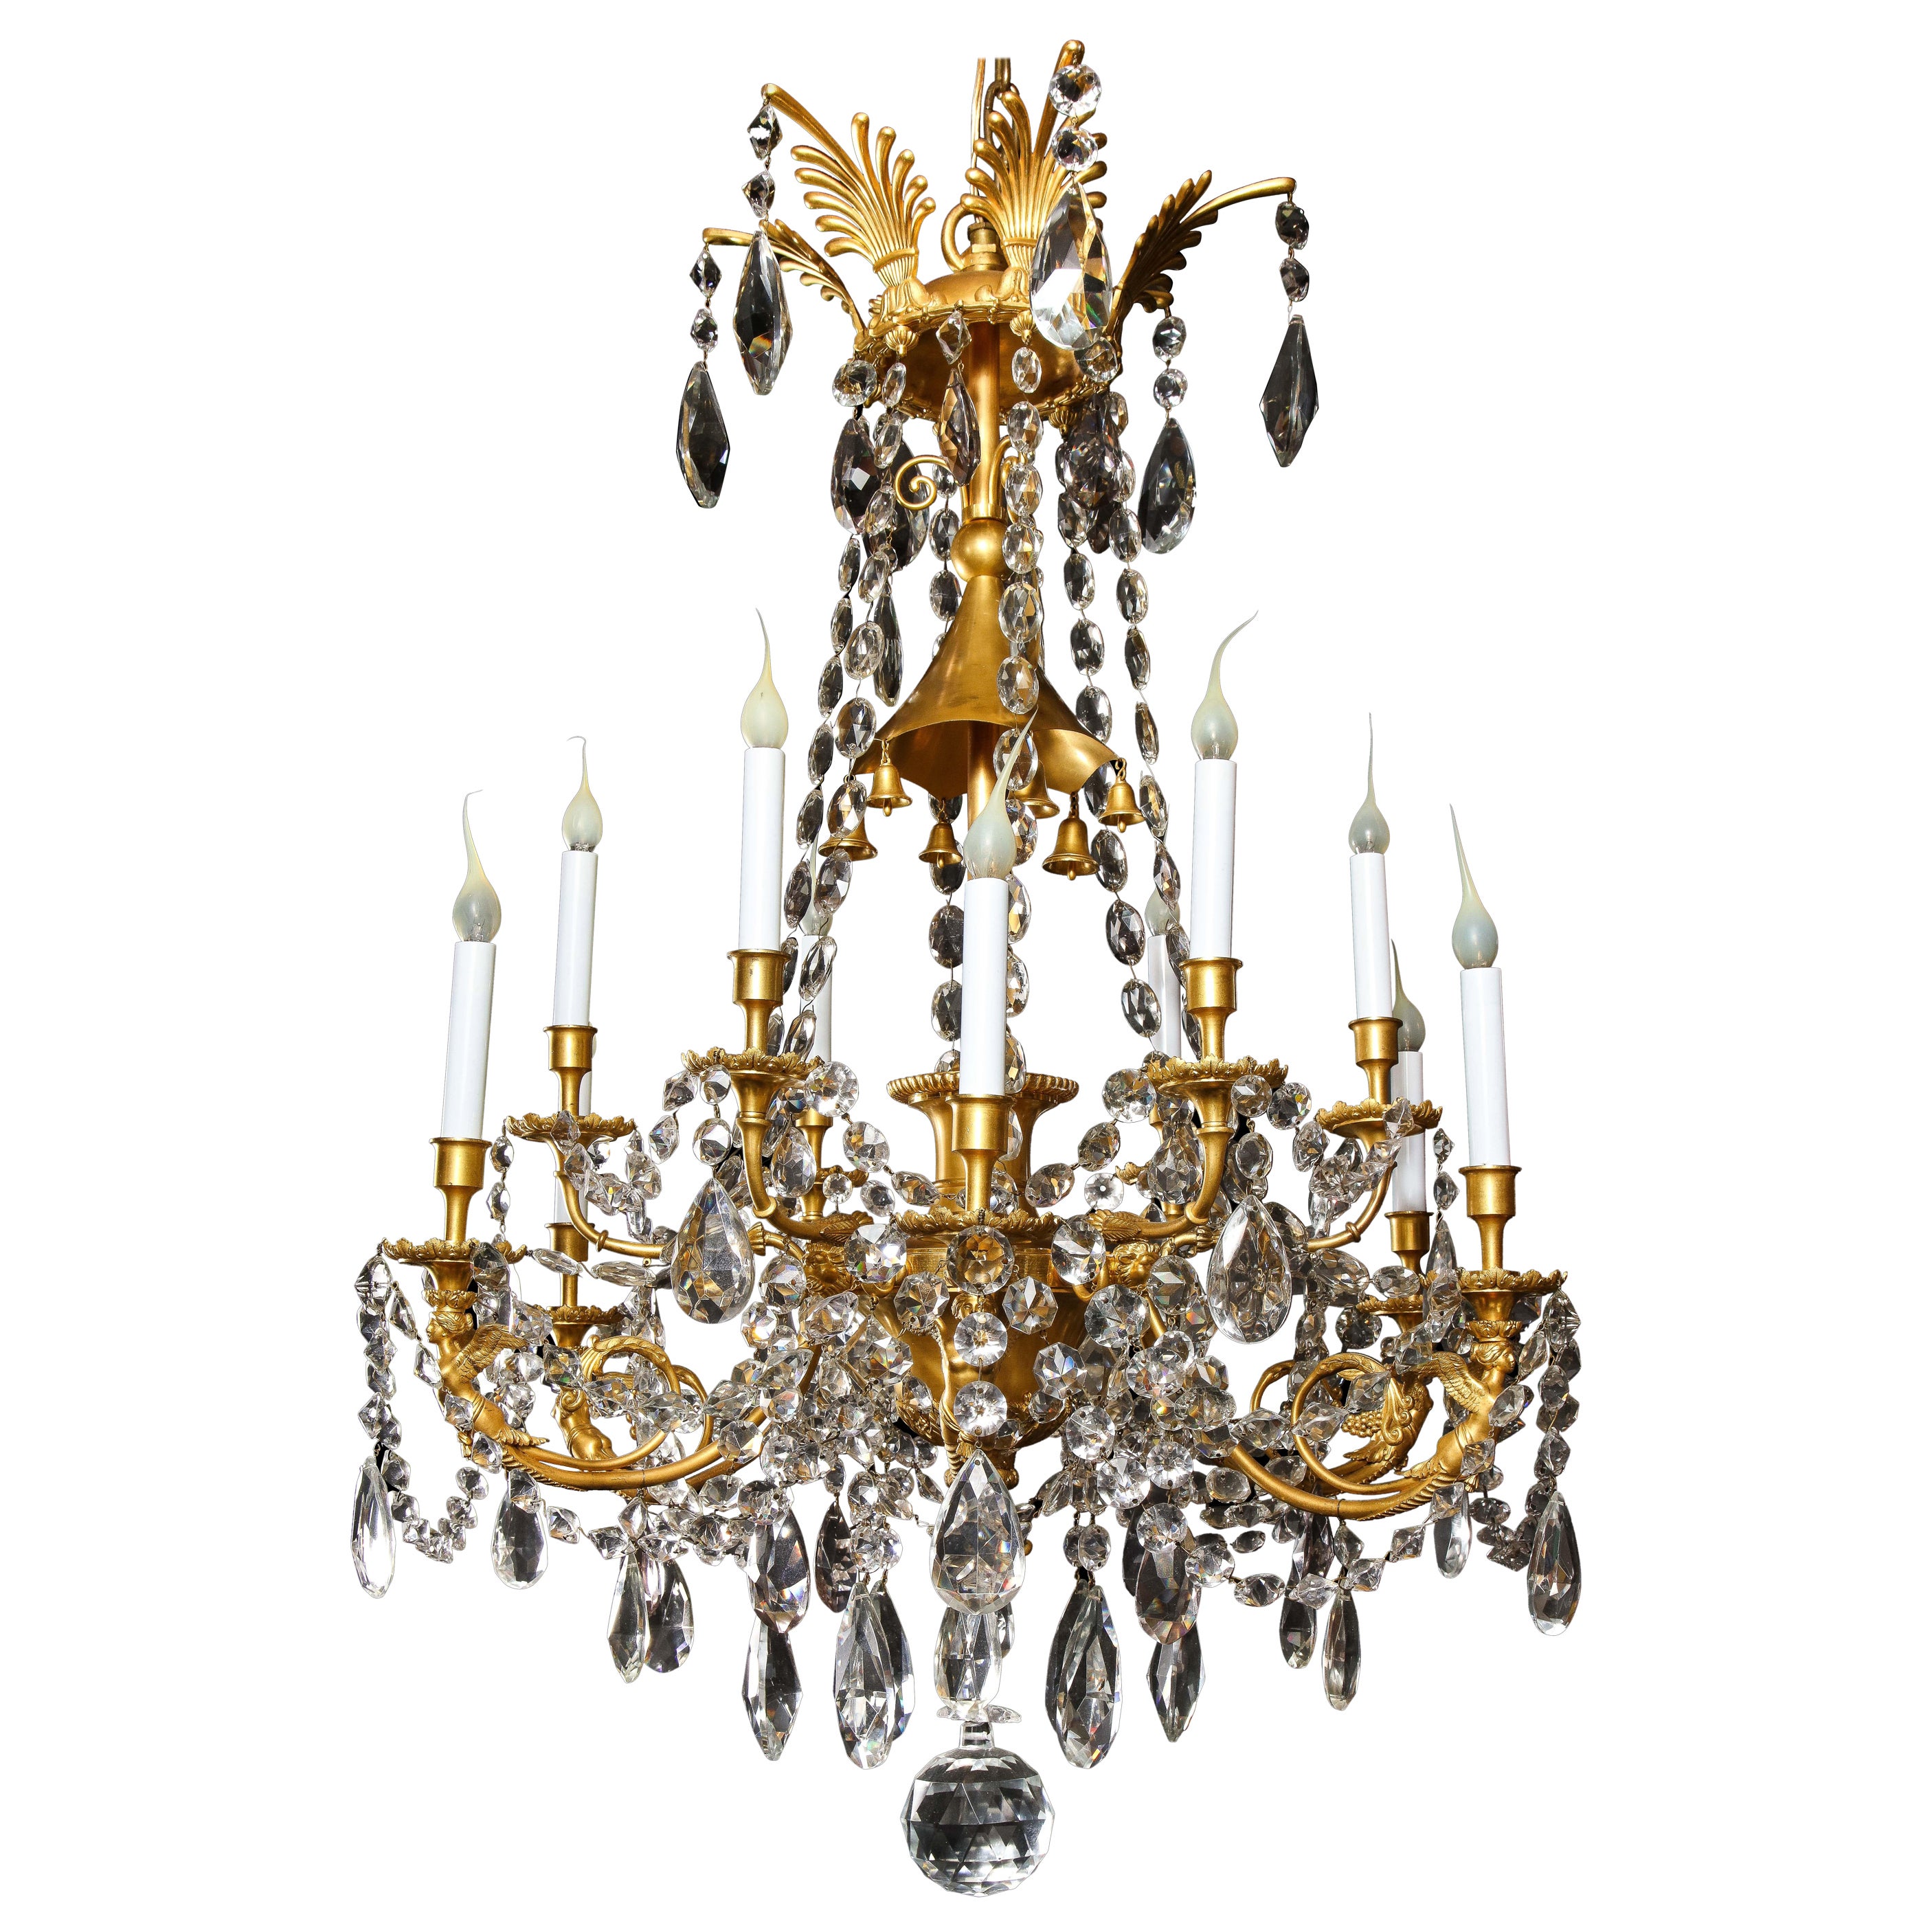 Spectacular Antique French Louis XVI Style Gilt Bronze and Crystal Chandelier